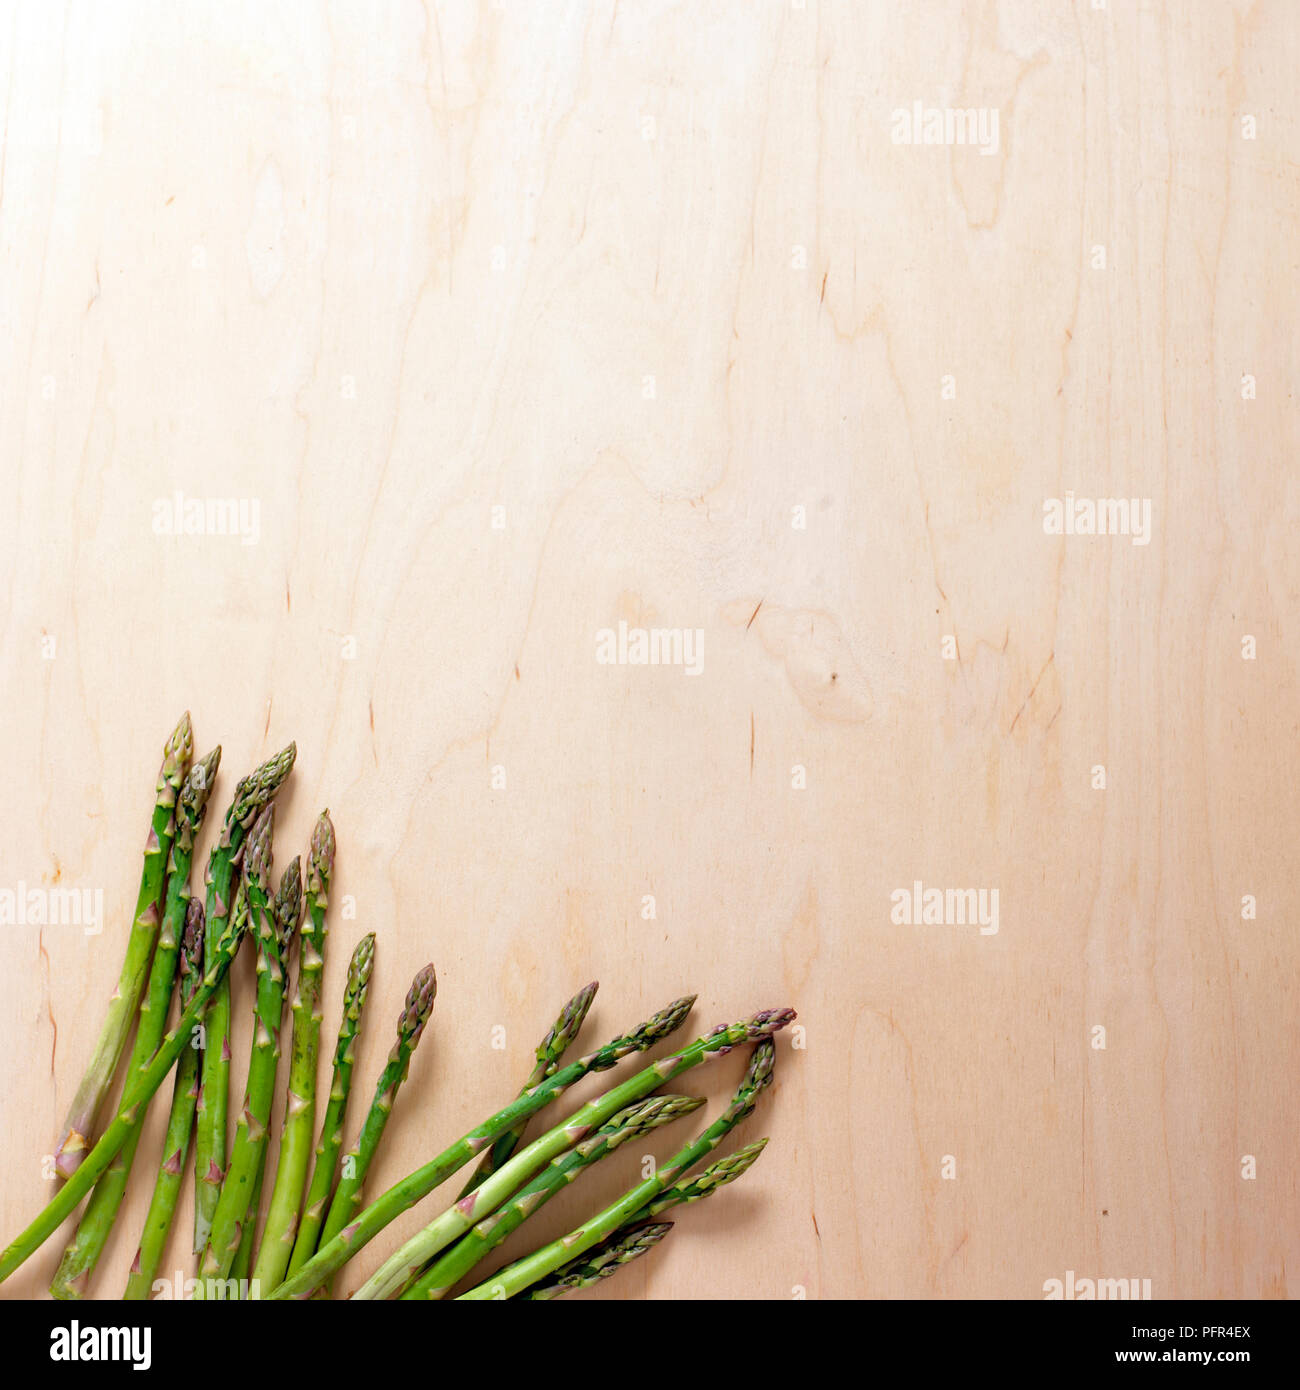 Green asparagus on wooden surface Stock Photo